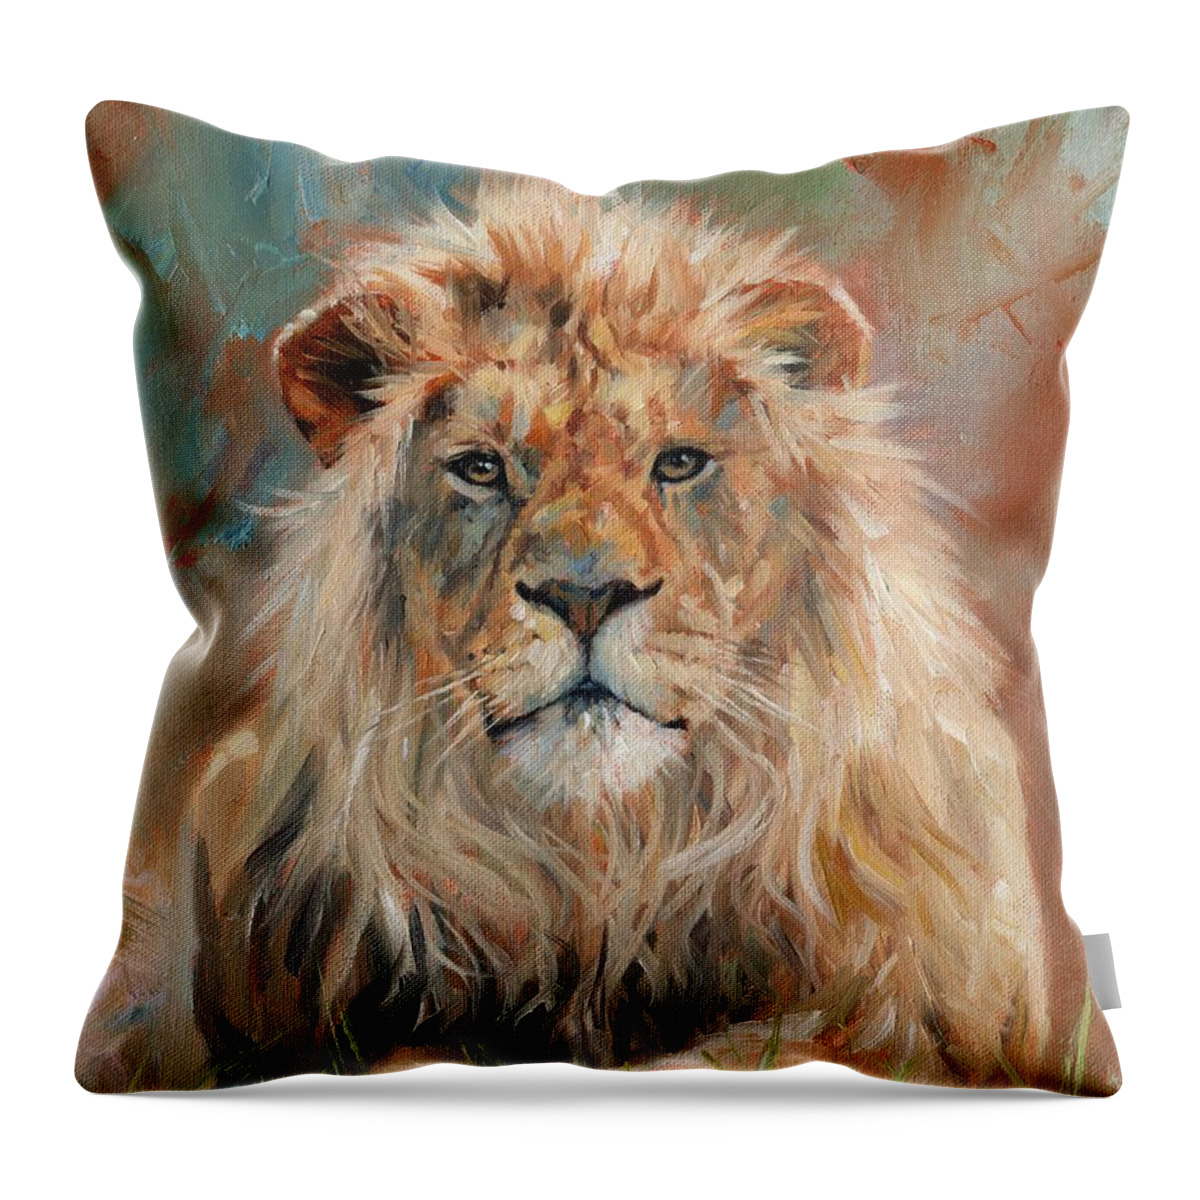 Lion Throw Pillow featuring the painting Lion #10 by David Stribbling